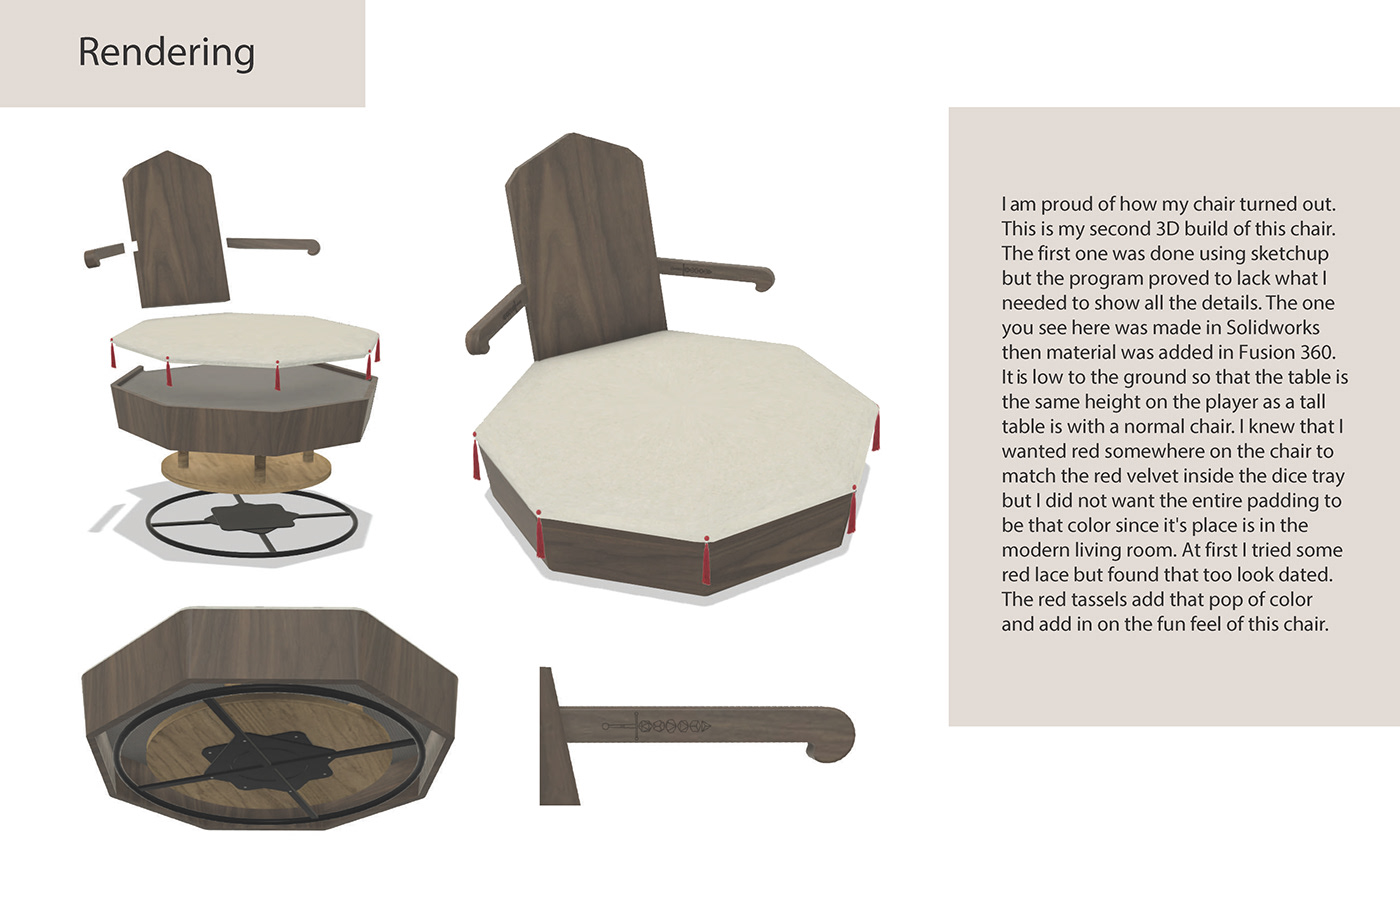 dice dnd Dungeons and Dragons furniture design 